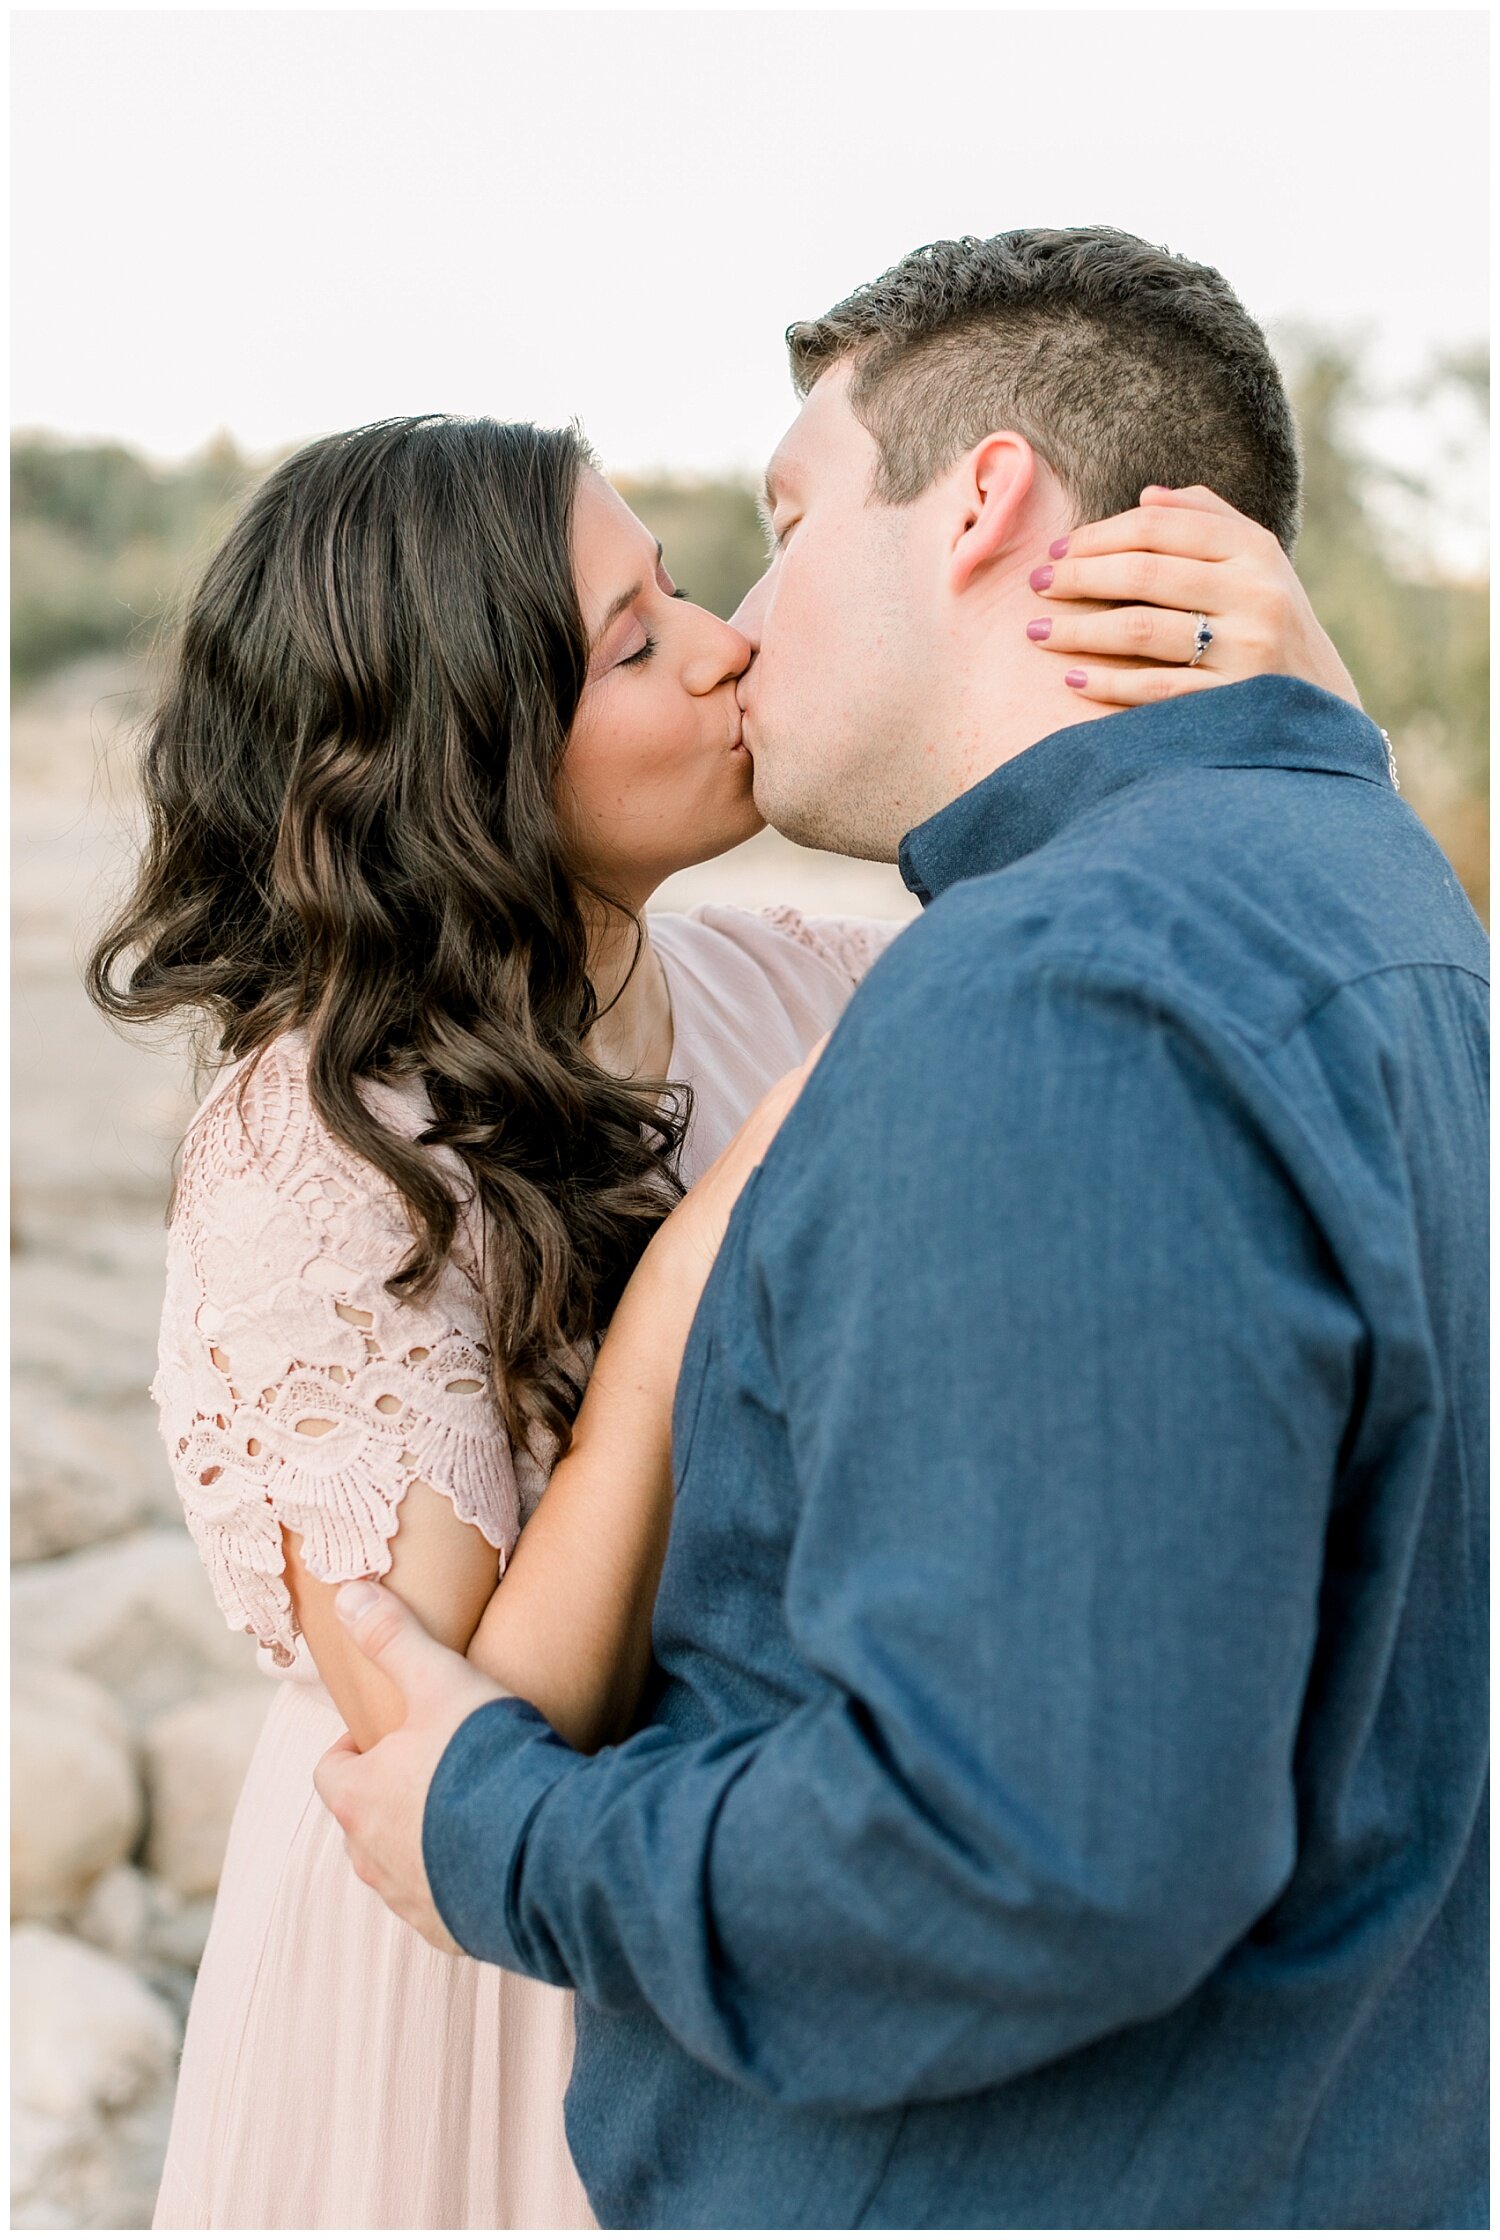 Tucson Engagement Session at Catalina State Park.